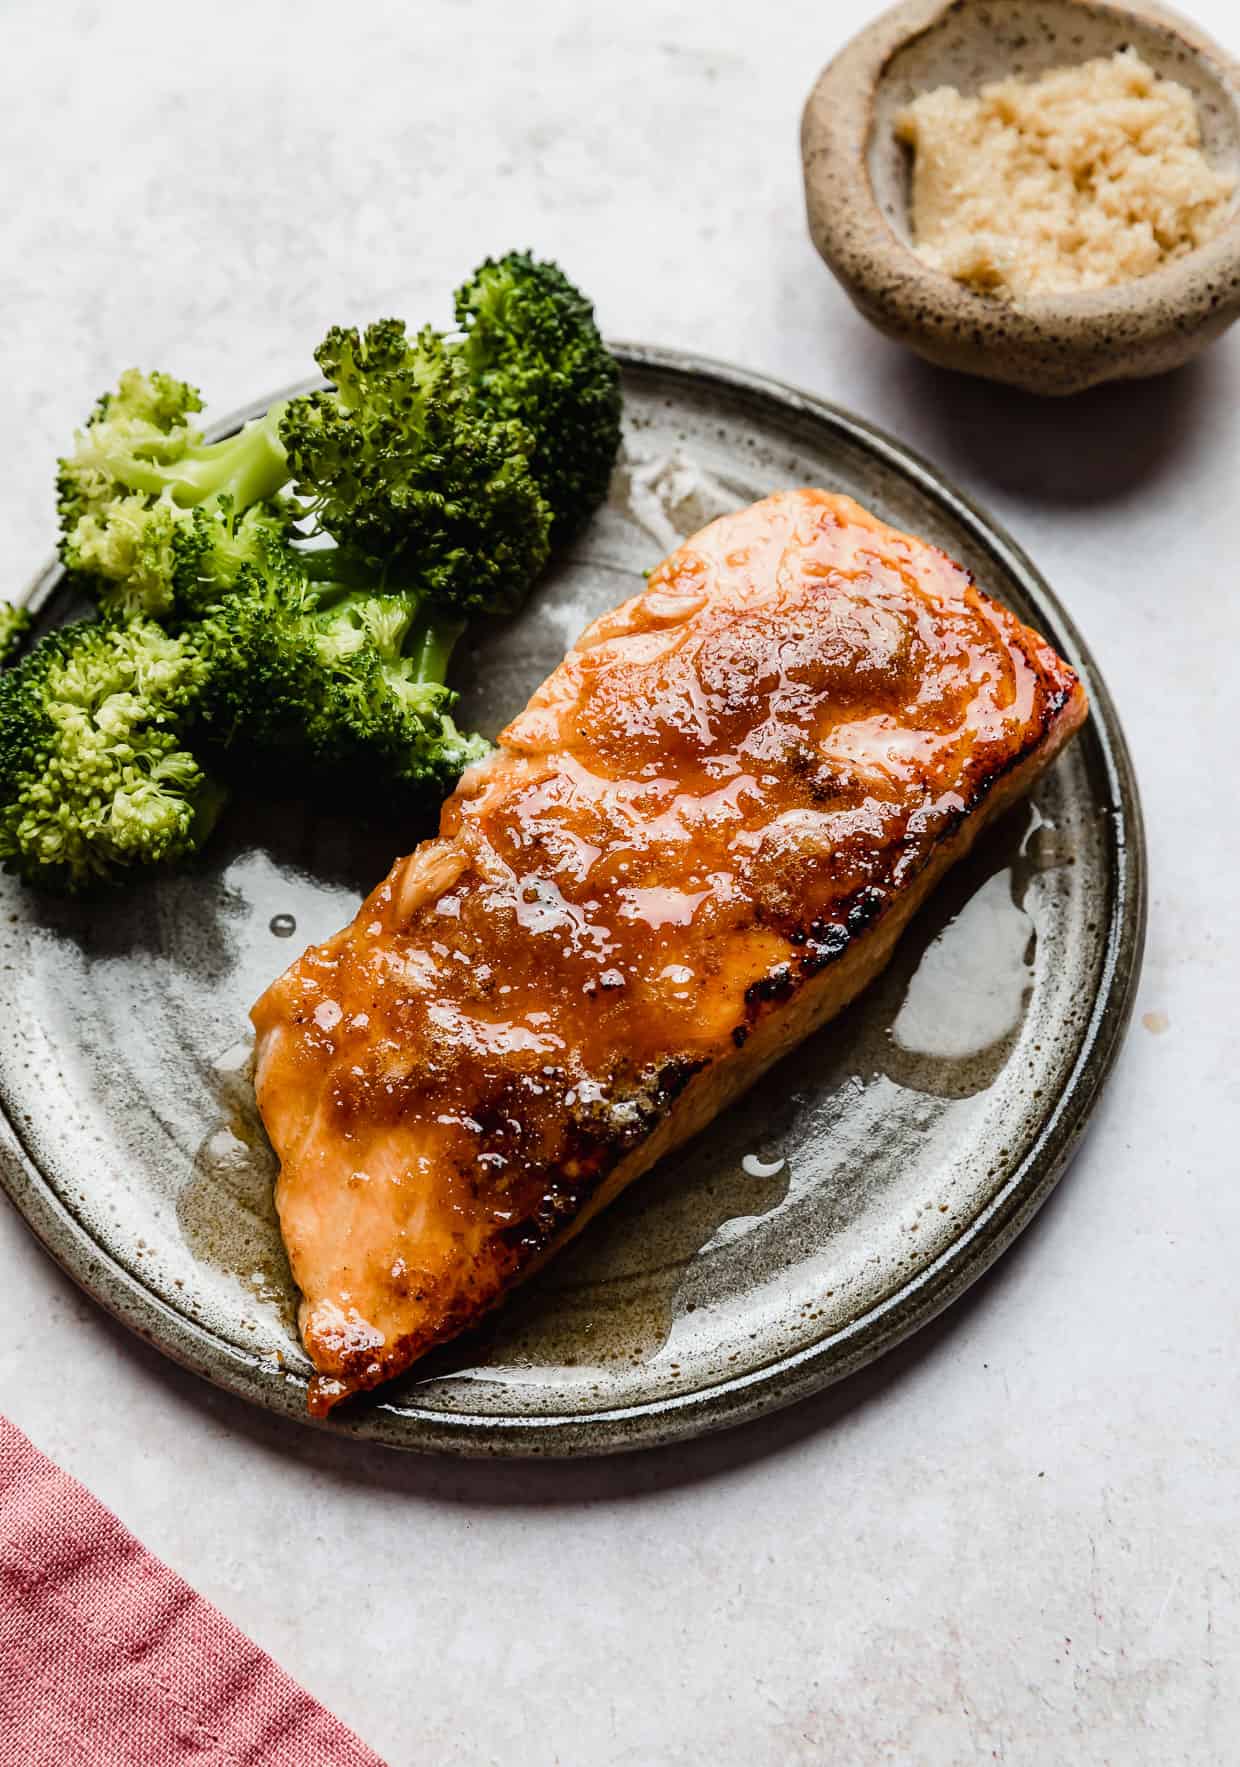 Brown Sugar Crusted Salmon and broccoli on a grey plate.